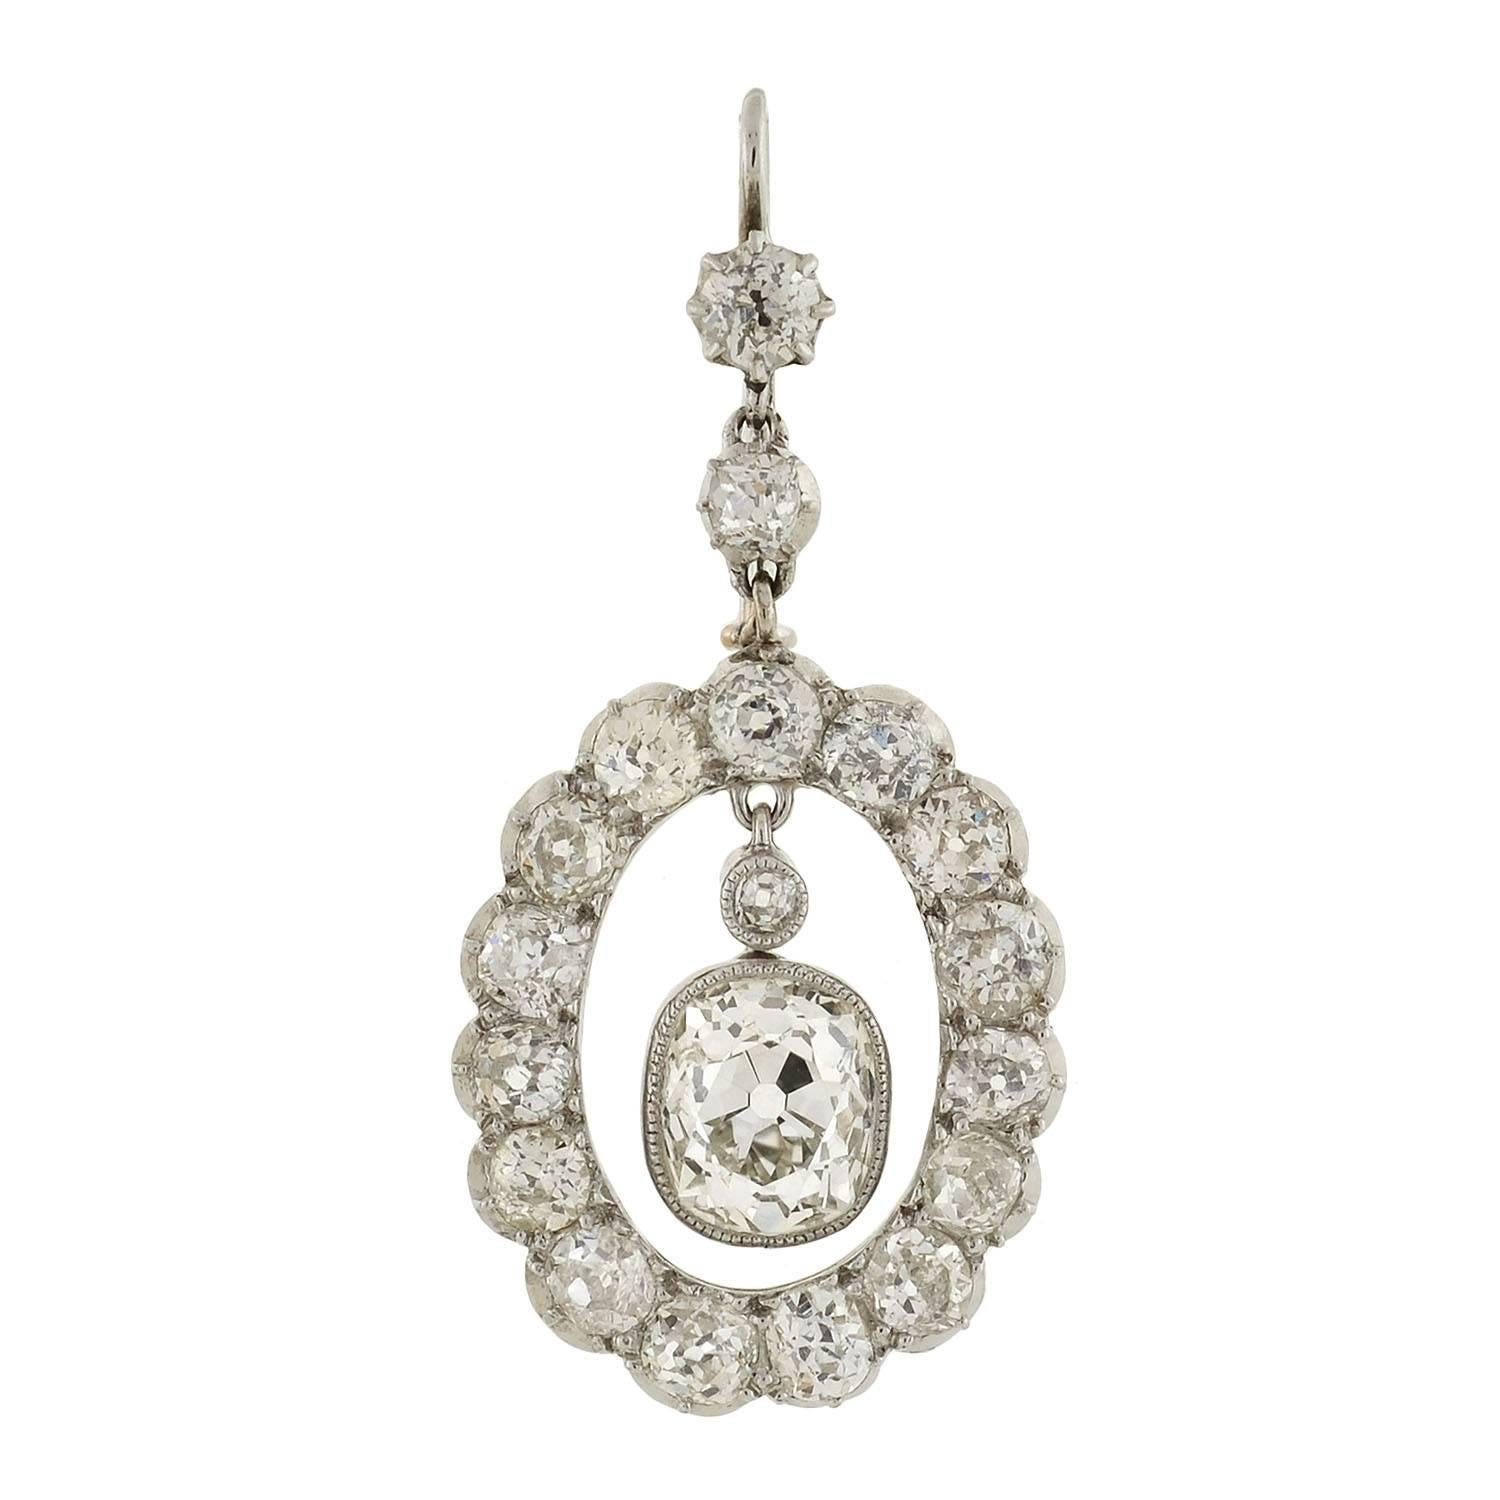 An incredible pair of diamond encrusted earrings from the Edwardian (ca1910) era! The earrings are crafted in platinum and have a spectacular open halo design. Dangling in the center is a luscious cushion mine cut diamond, which is contained within